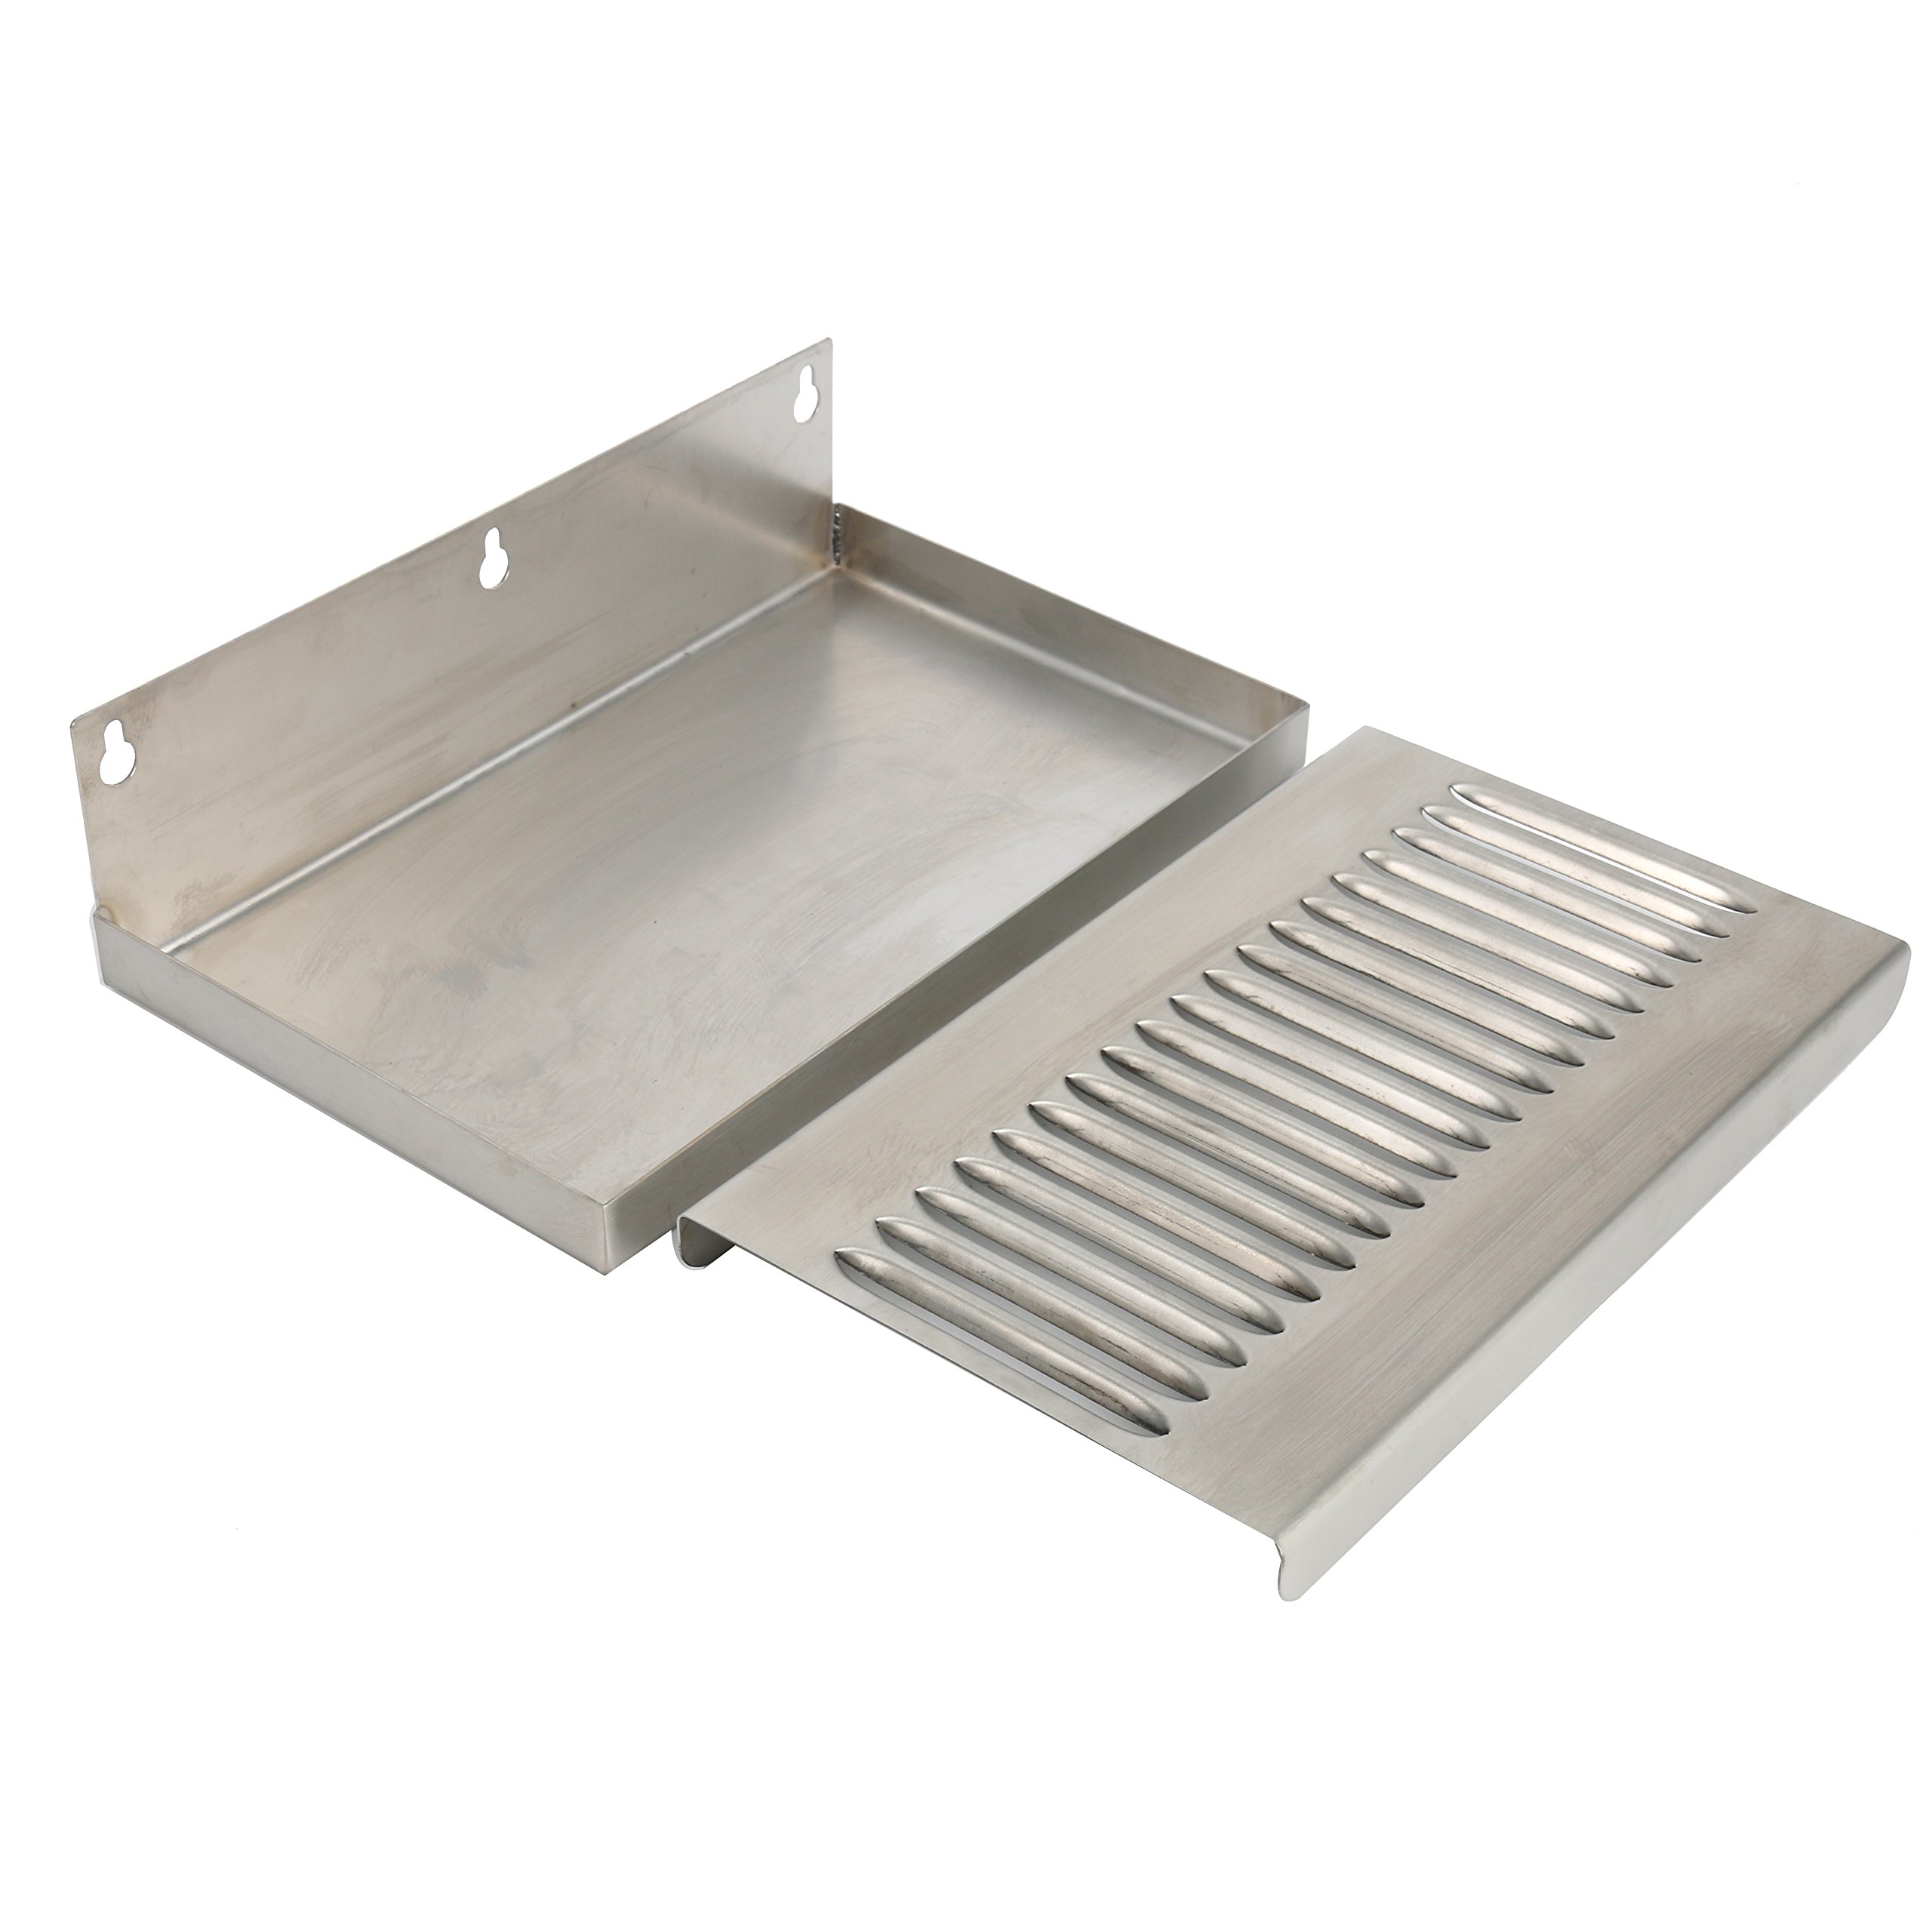 YaeBrew 10 Inch Draft Beer Wall Mount Drip Tray - Stainless Steel - No Drain